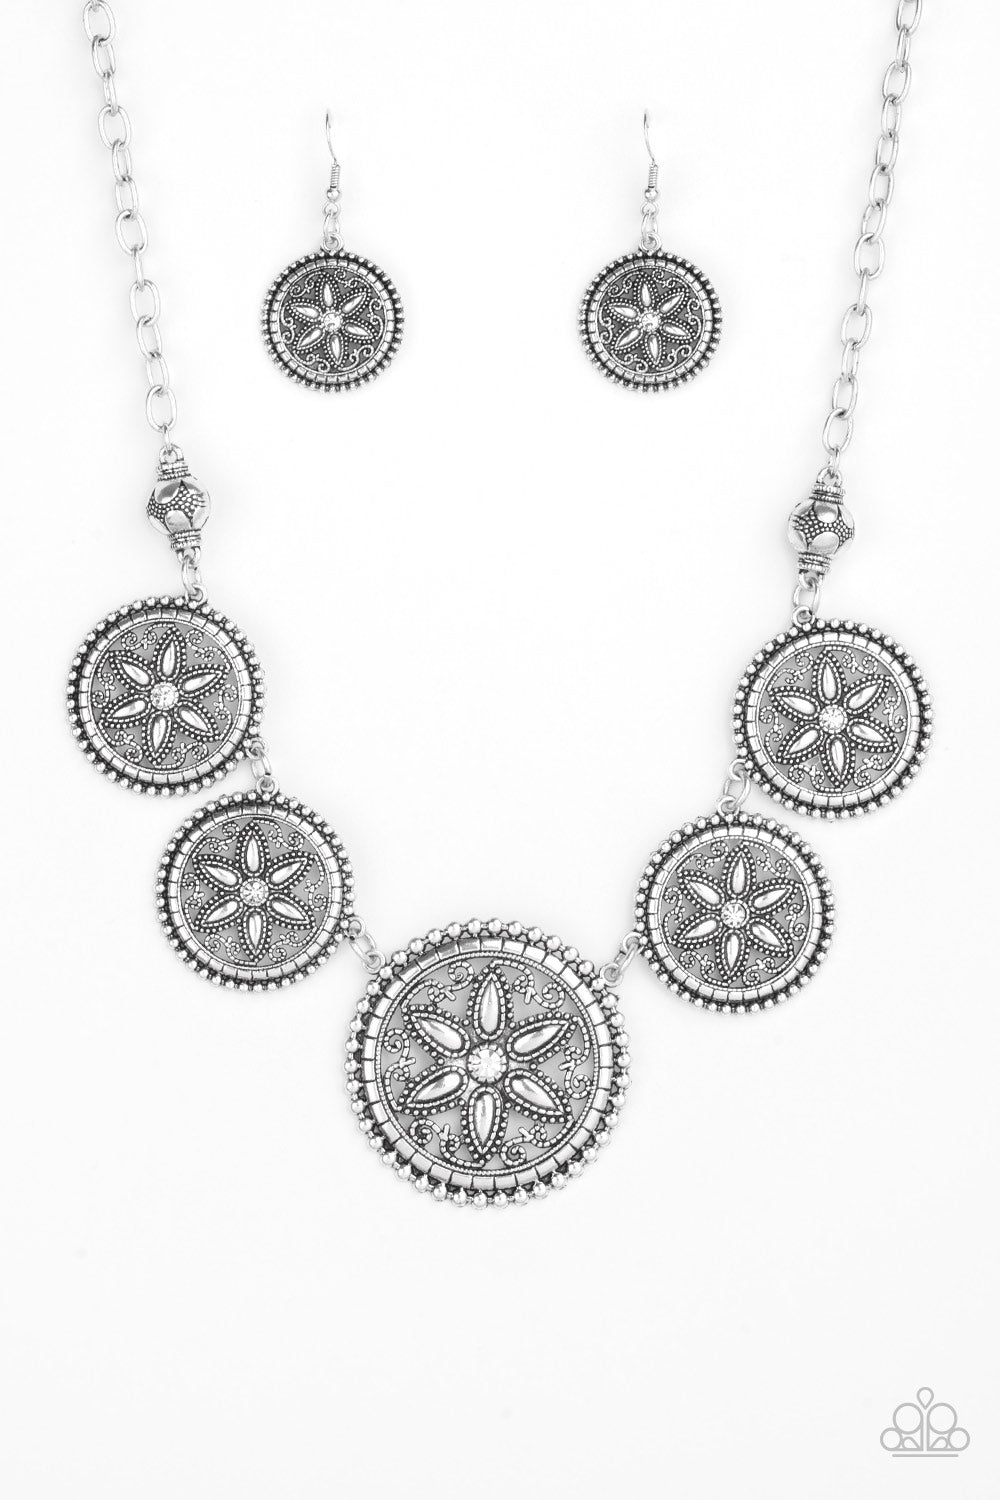 Written In The STAR LILIES - White rhinestones necklace